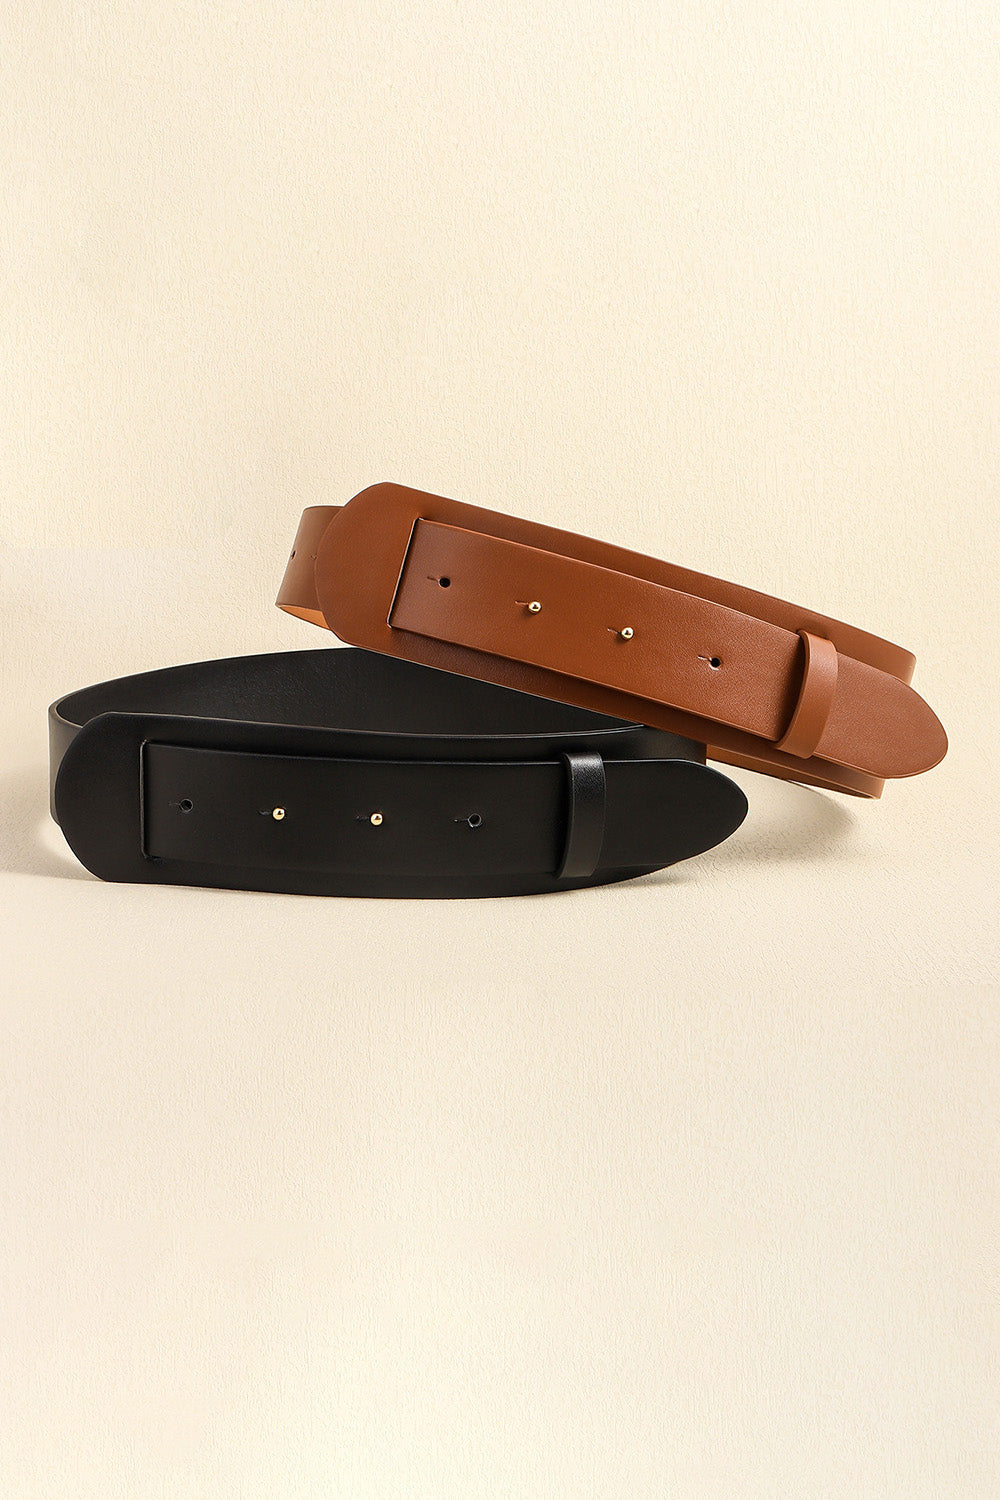 PU Leather Belt Print on any thing USA/STOD clothes